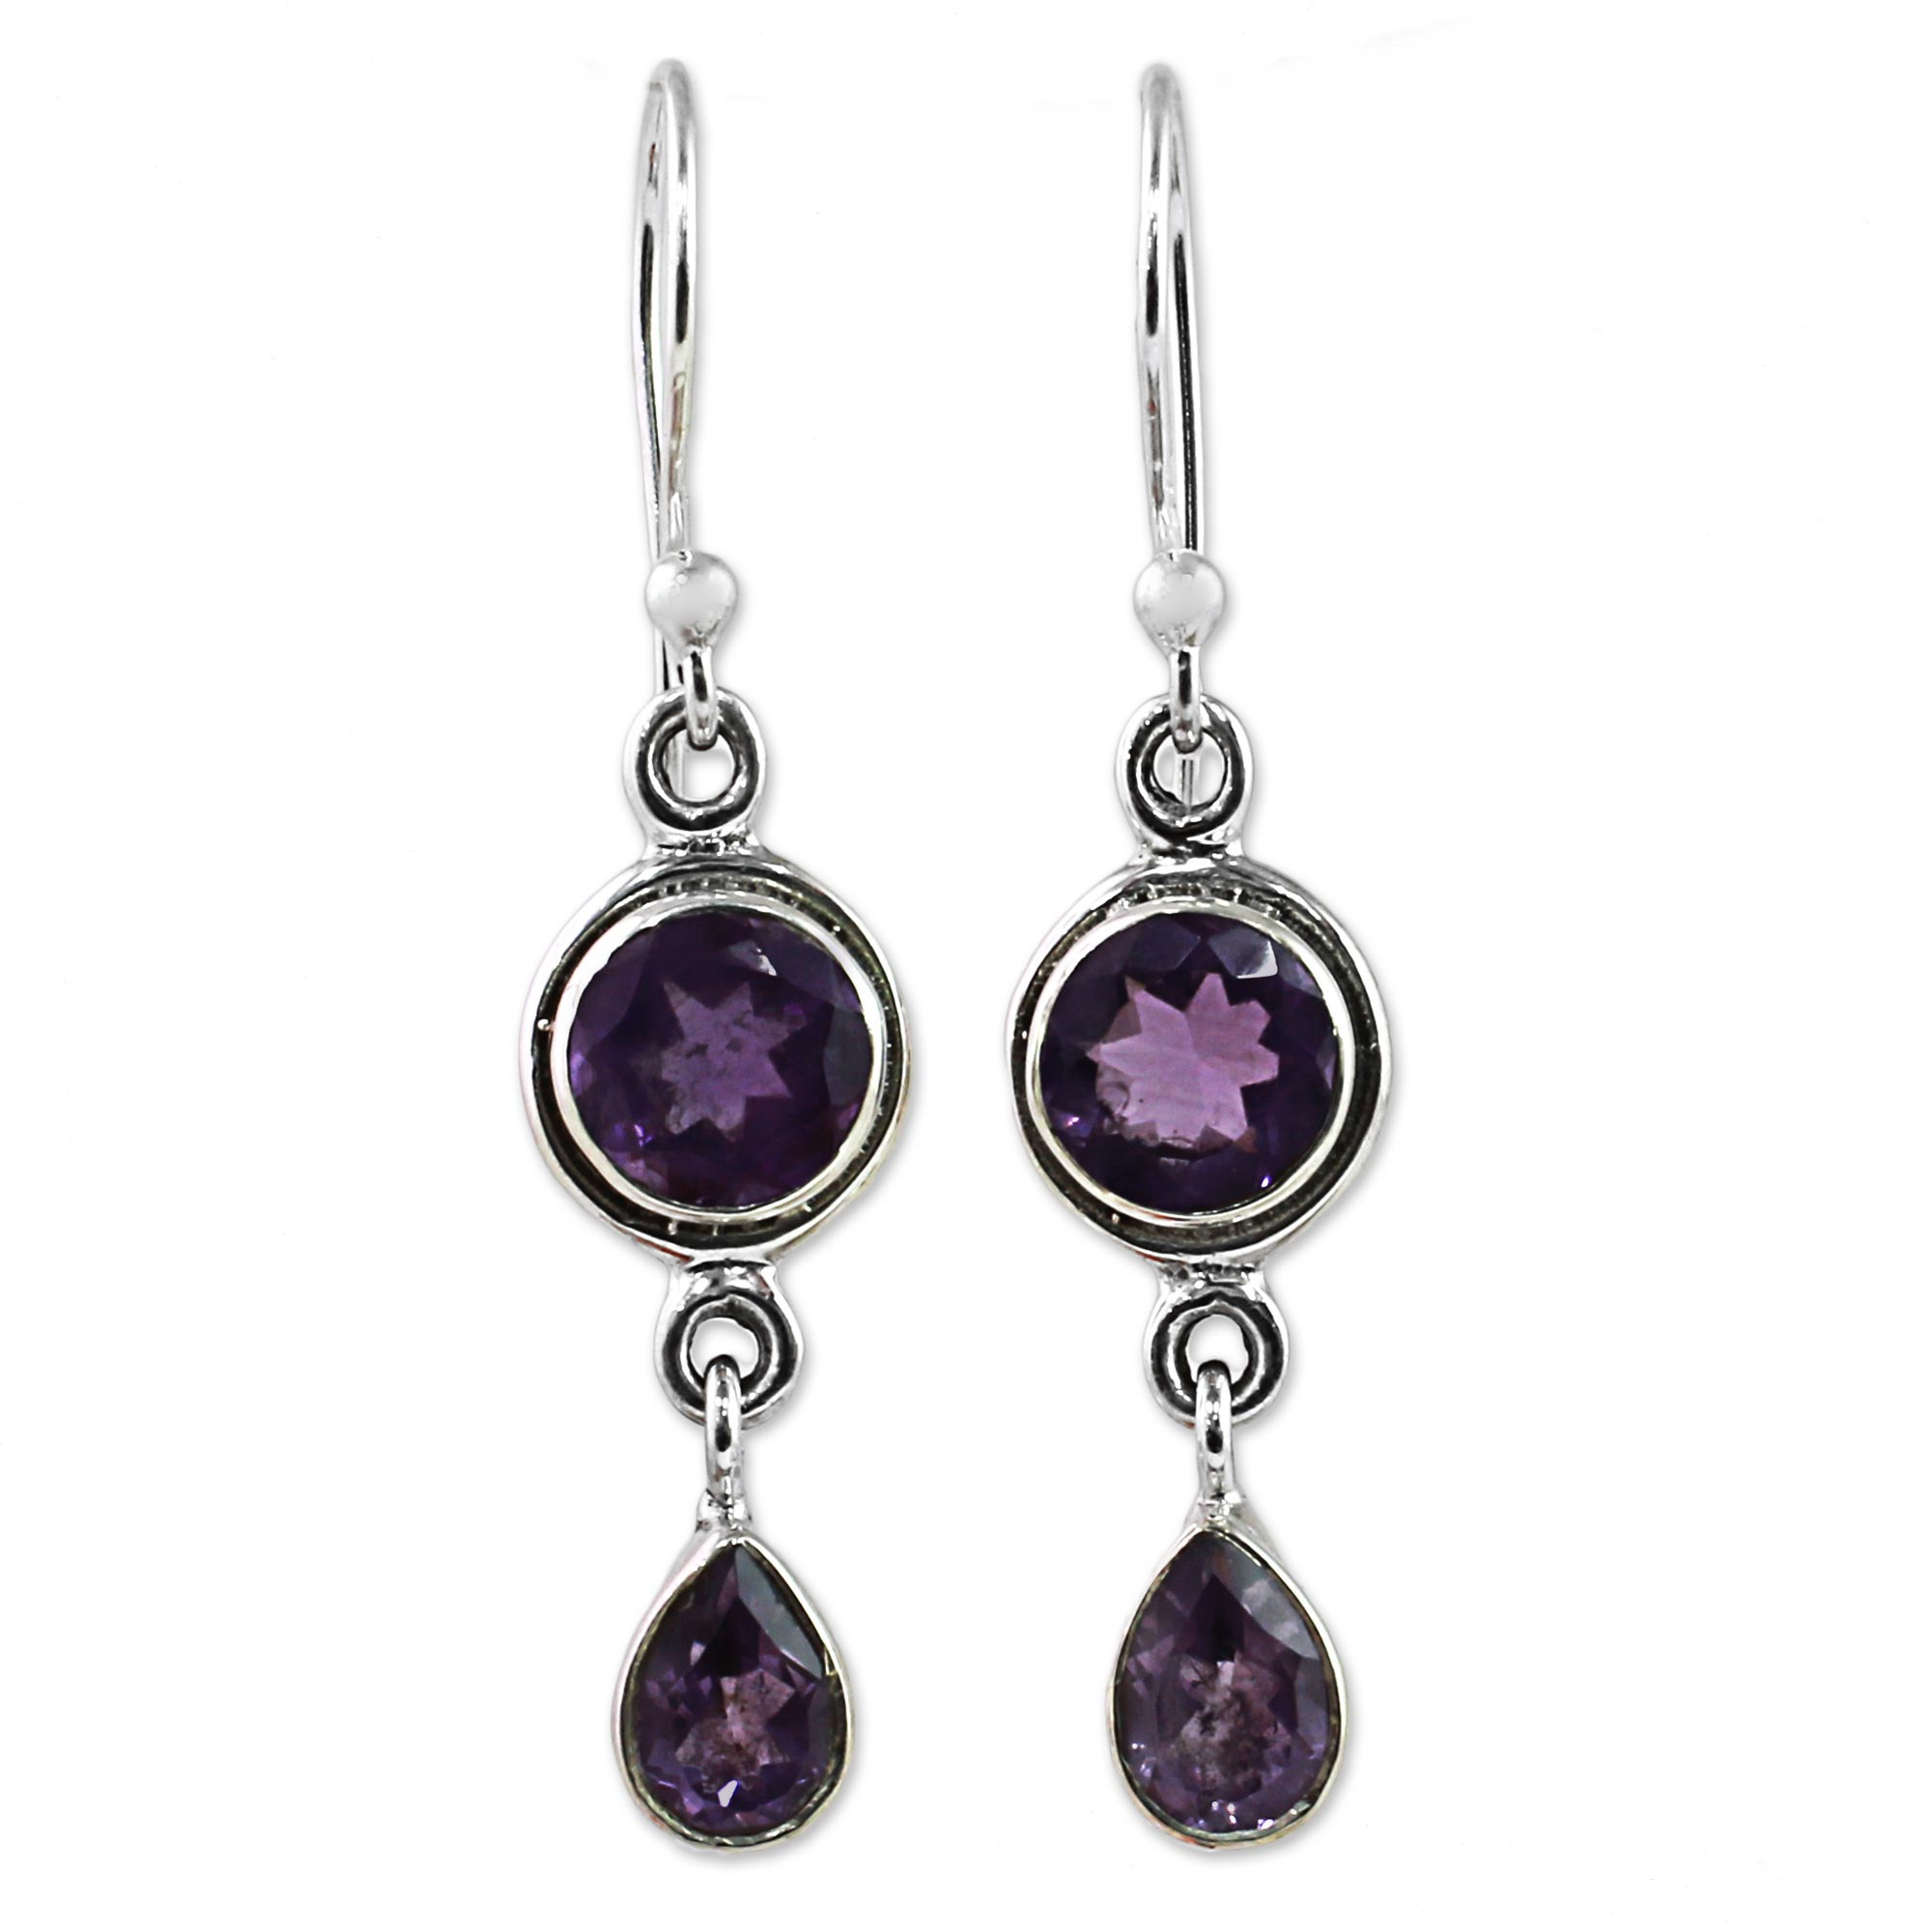 Faceted Amethyst and Sterling Silver Dangle Earrings - Lilac Droplets ...